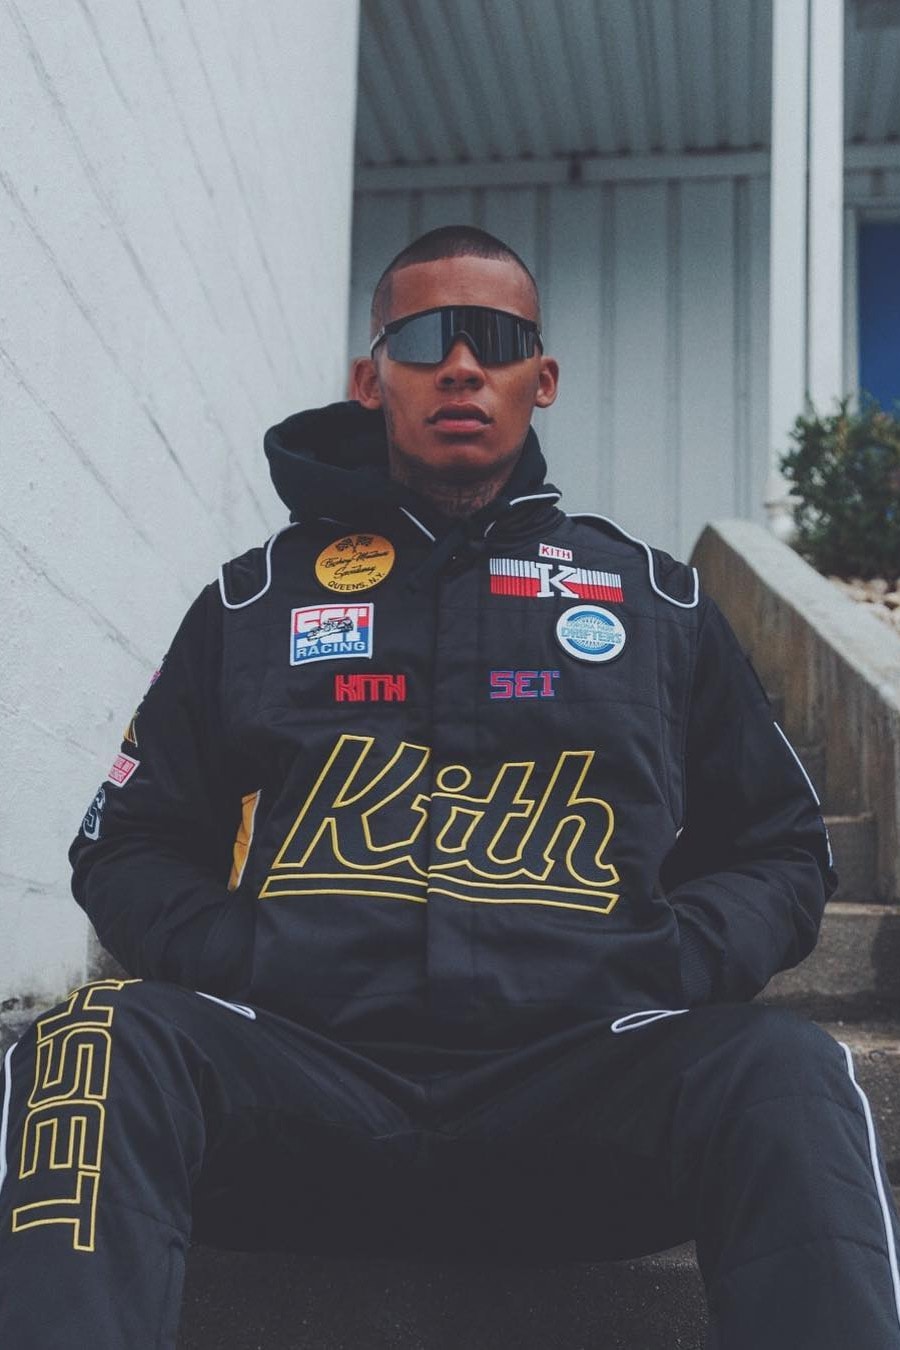 KITH Race Track Inspired Sweatsuit Ronnie Fieg Racing Formula 1 Kith Set Release Details Preview Reveal Buy